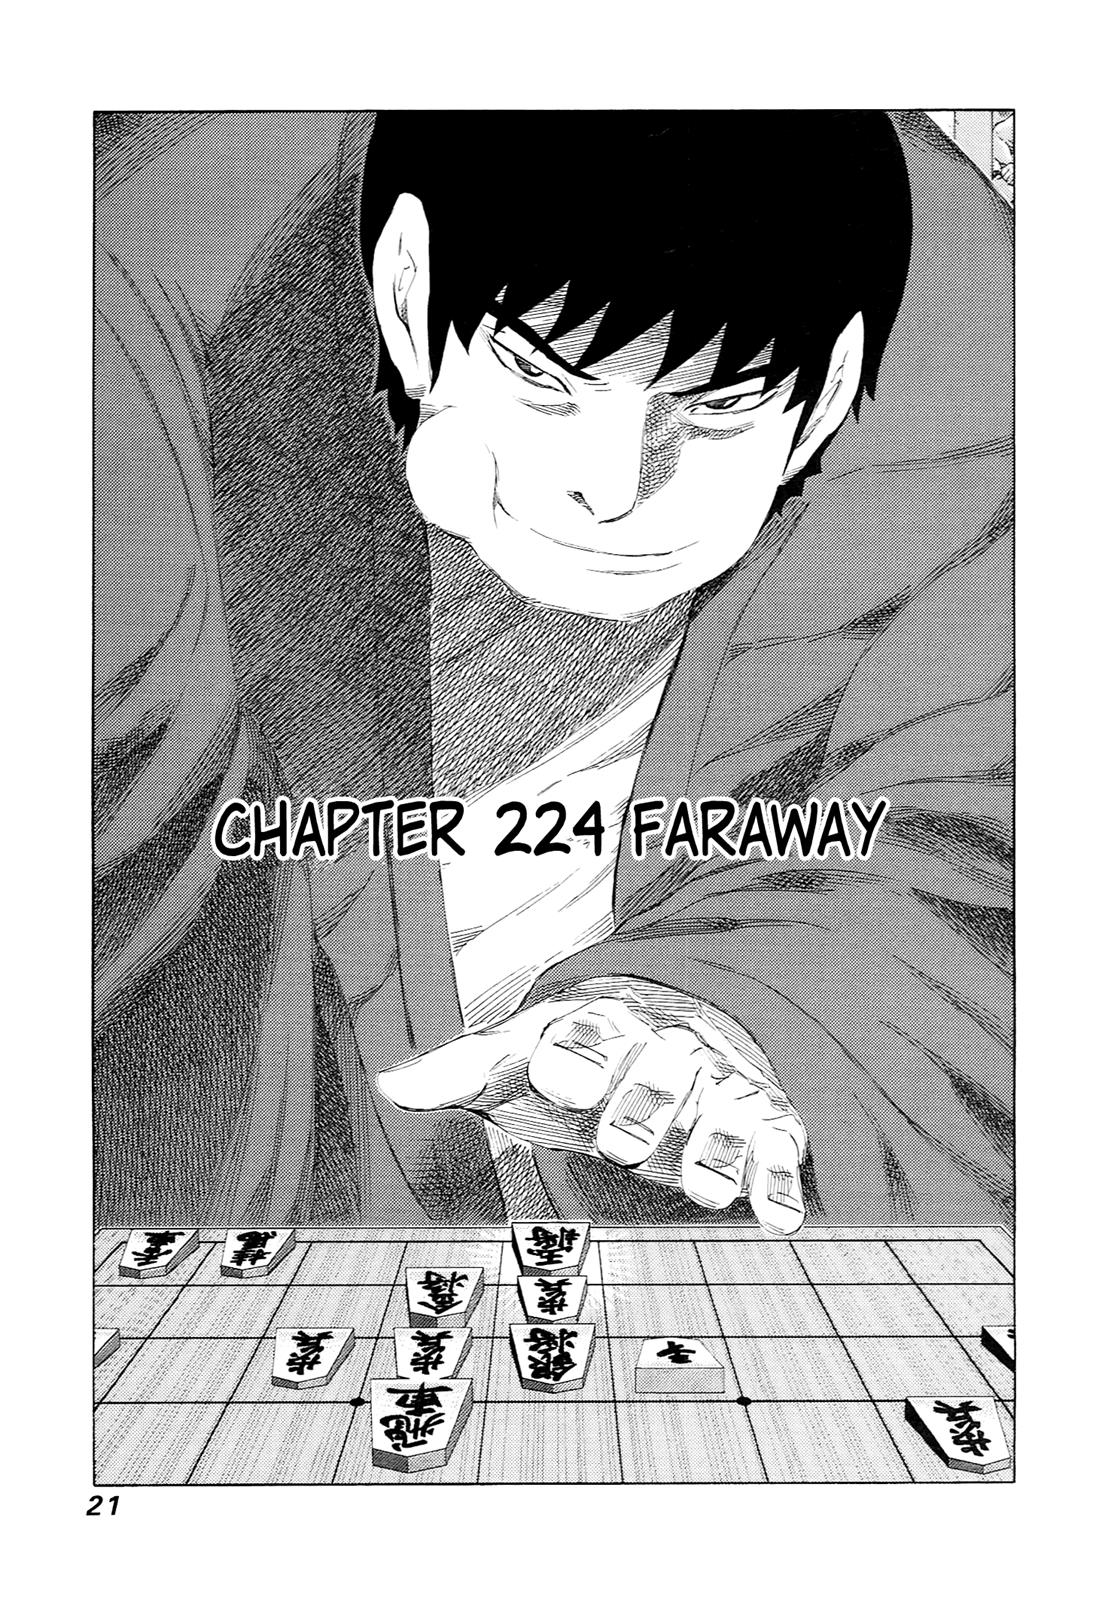 81 Diver Chapter 224 #1